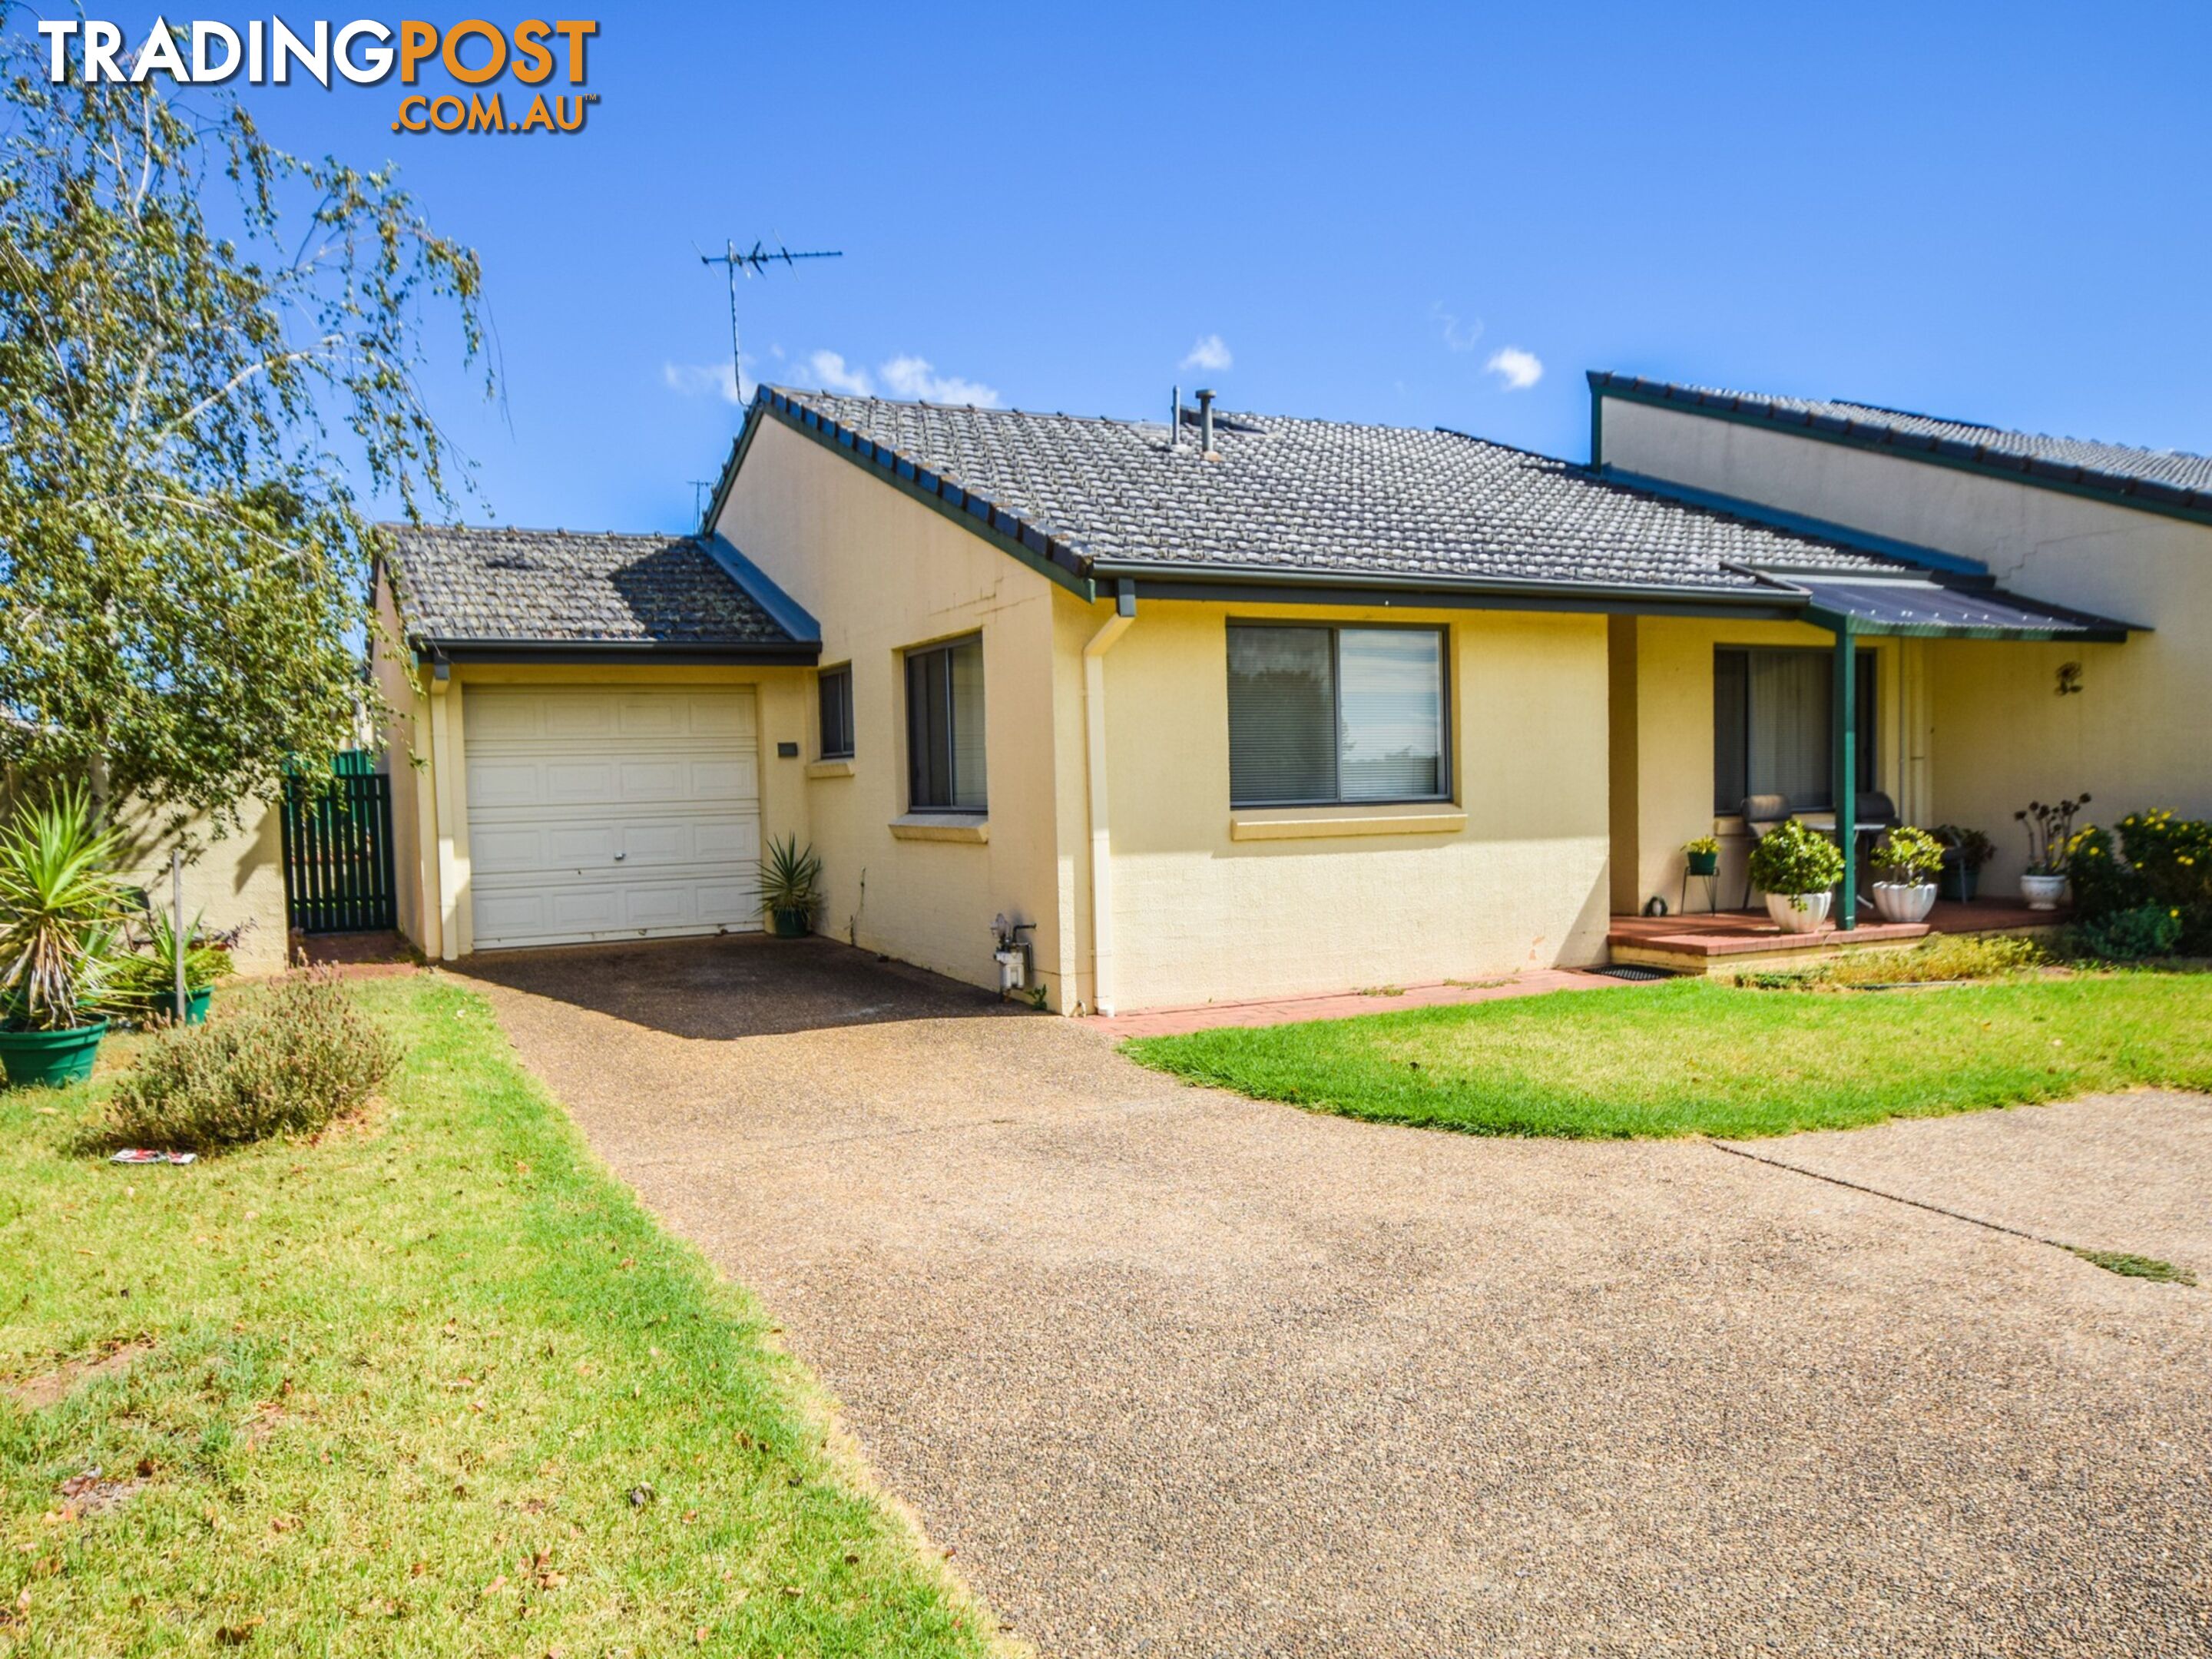 7/77 Thornhill Street YOUNG NSW 2594